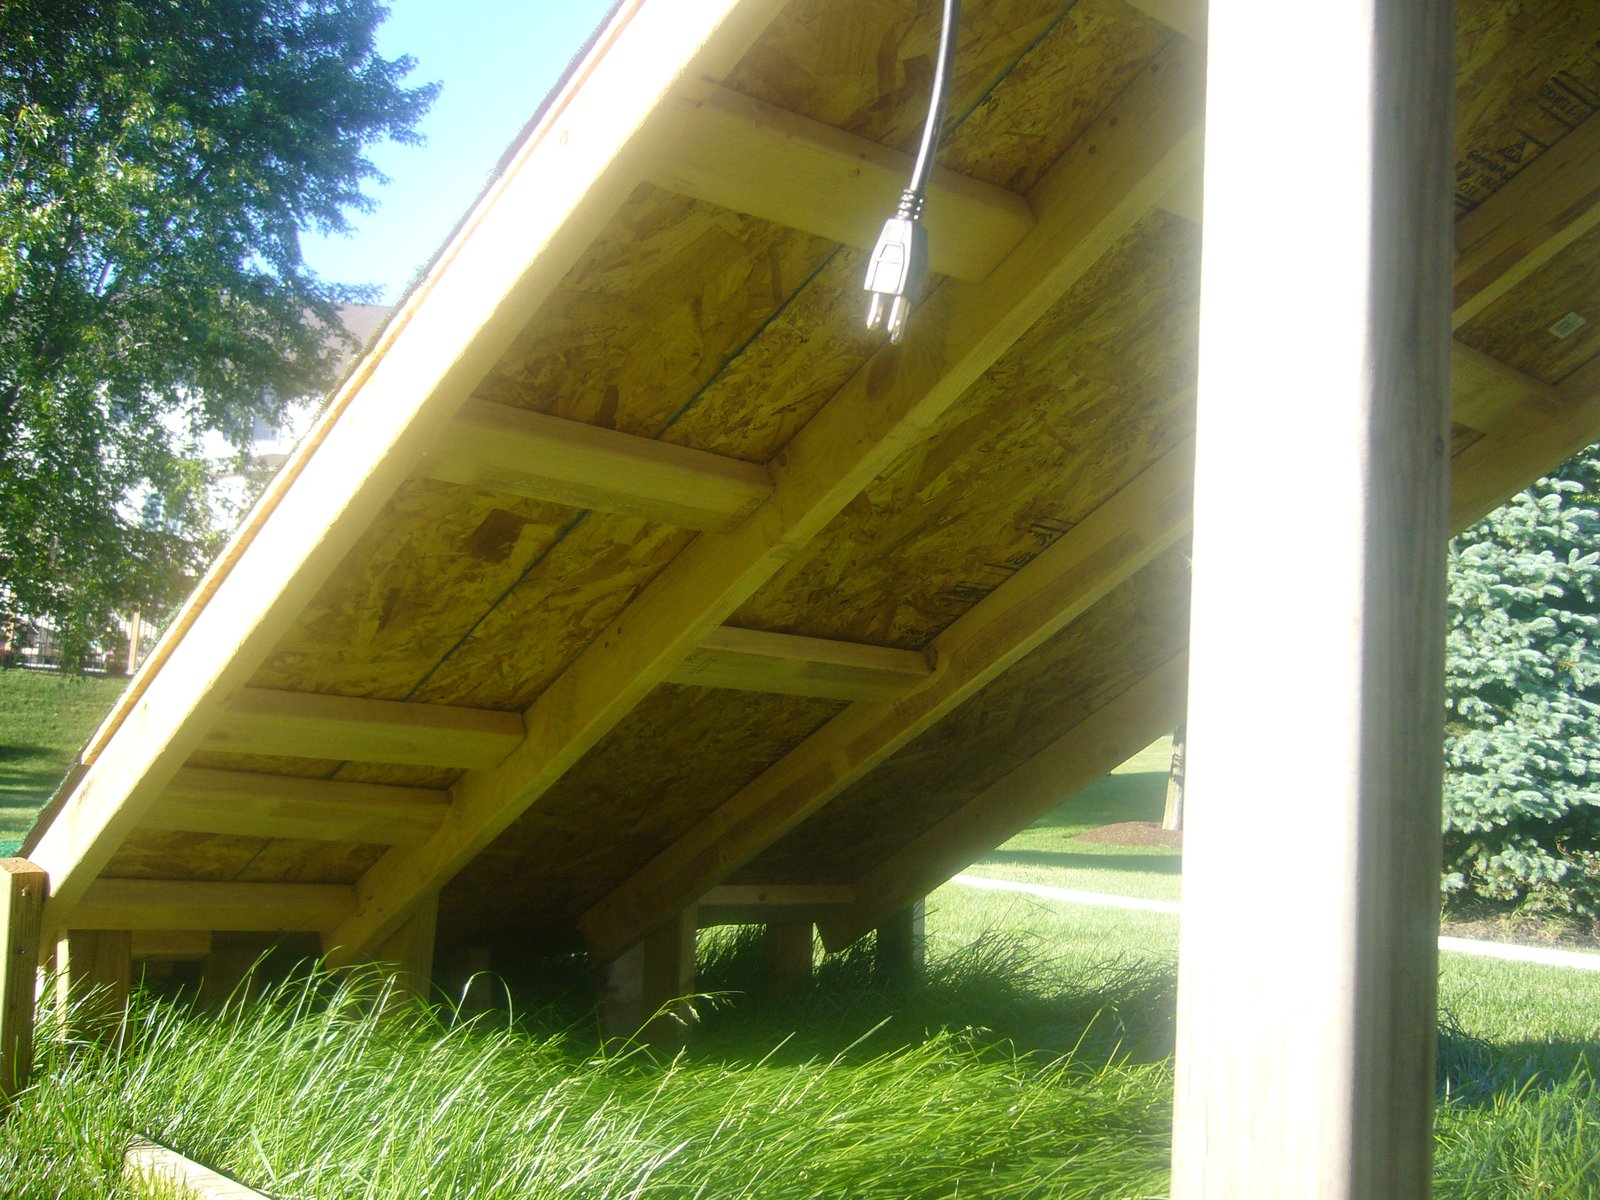 Under view of support planks